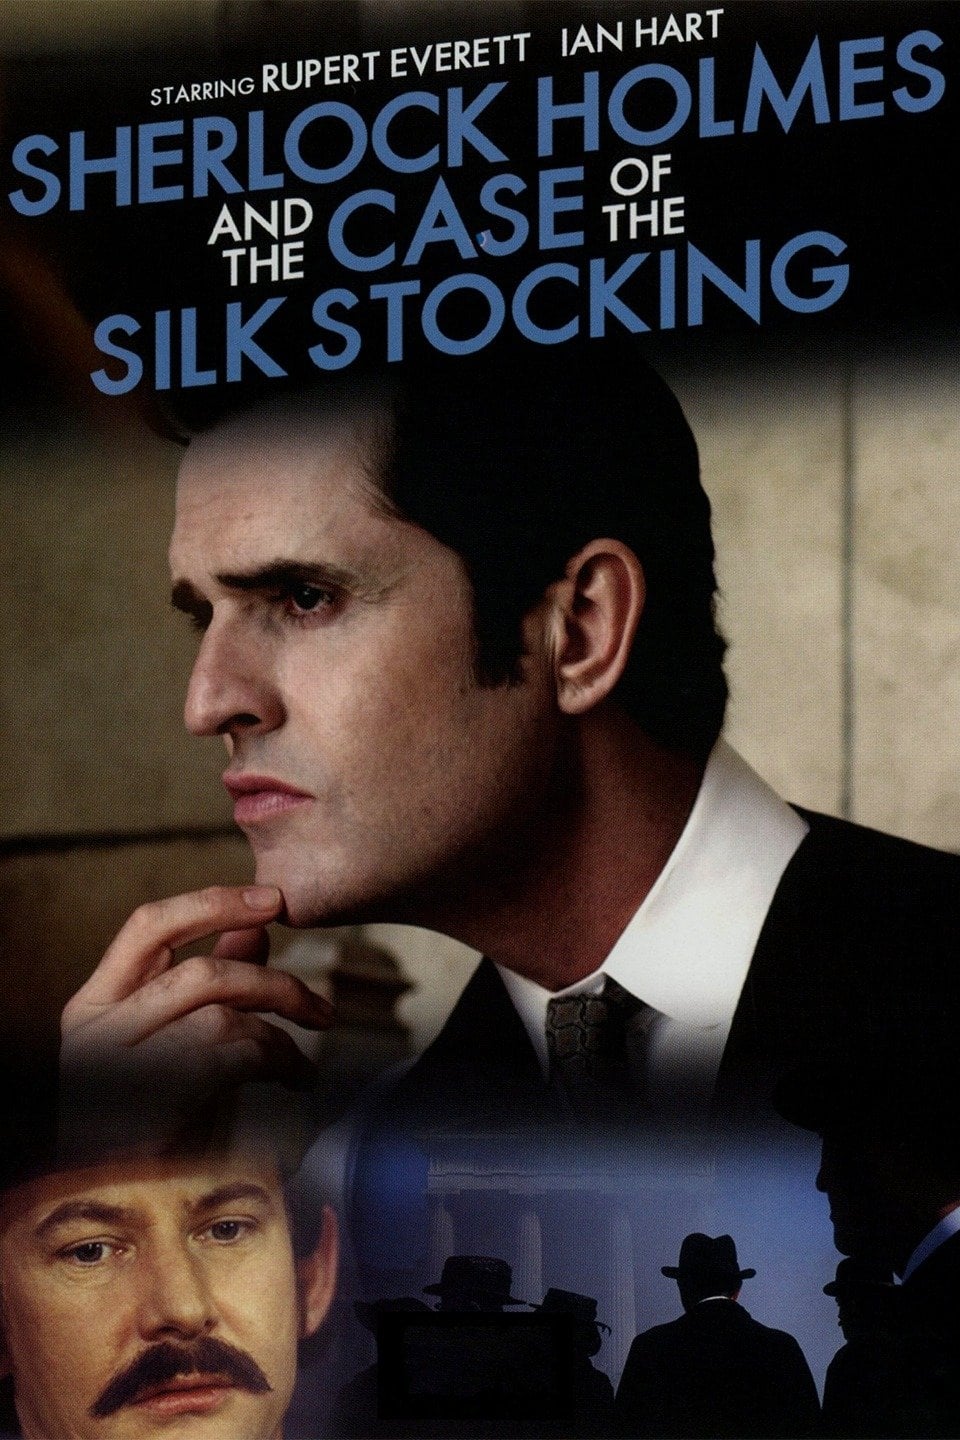 Sherlock Holmes and the Case of the Silk Stocking (2004)